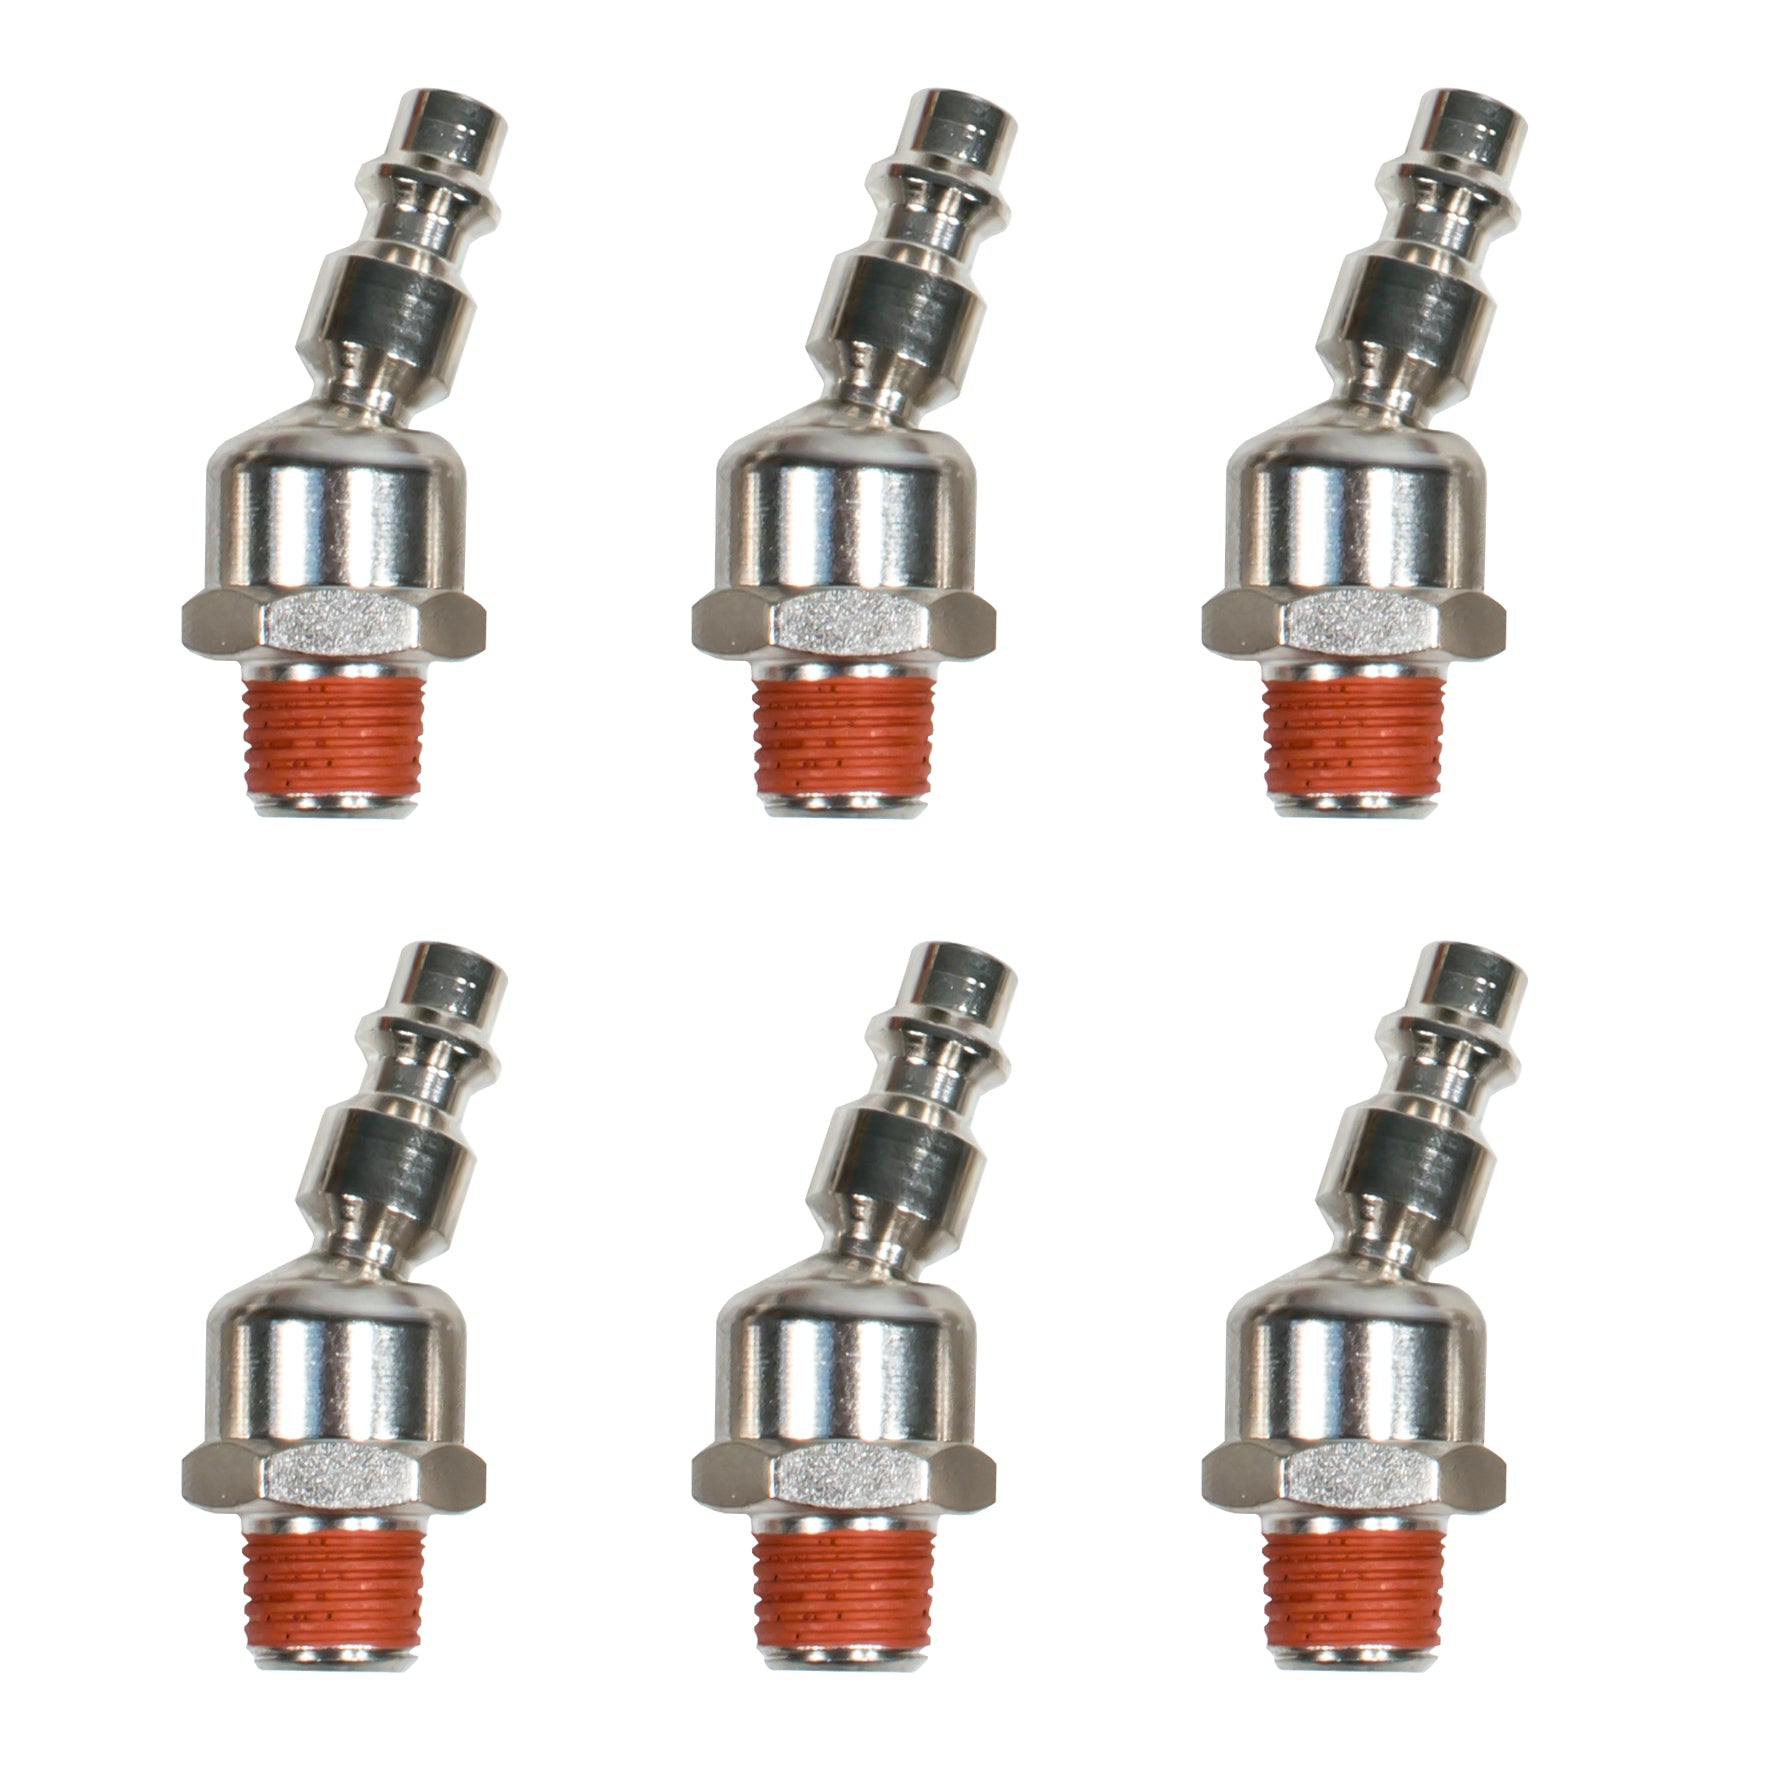 Industrial Swivel 1/4' NPT Male Quick Connect Air Tool Fittings, coupler- 6 pcs - Tool Guy Republic